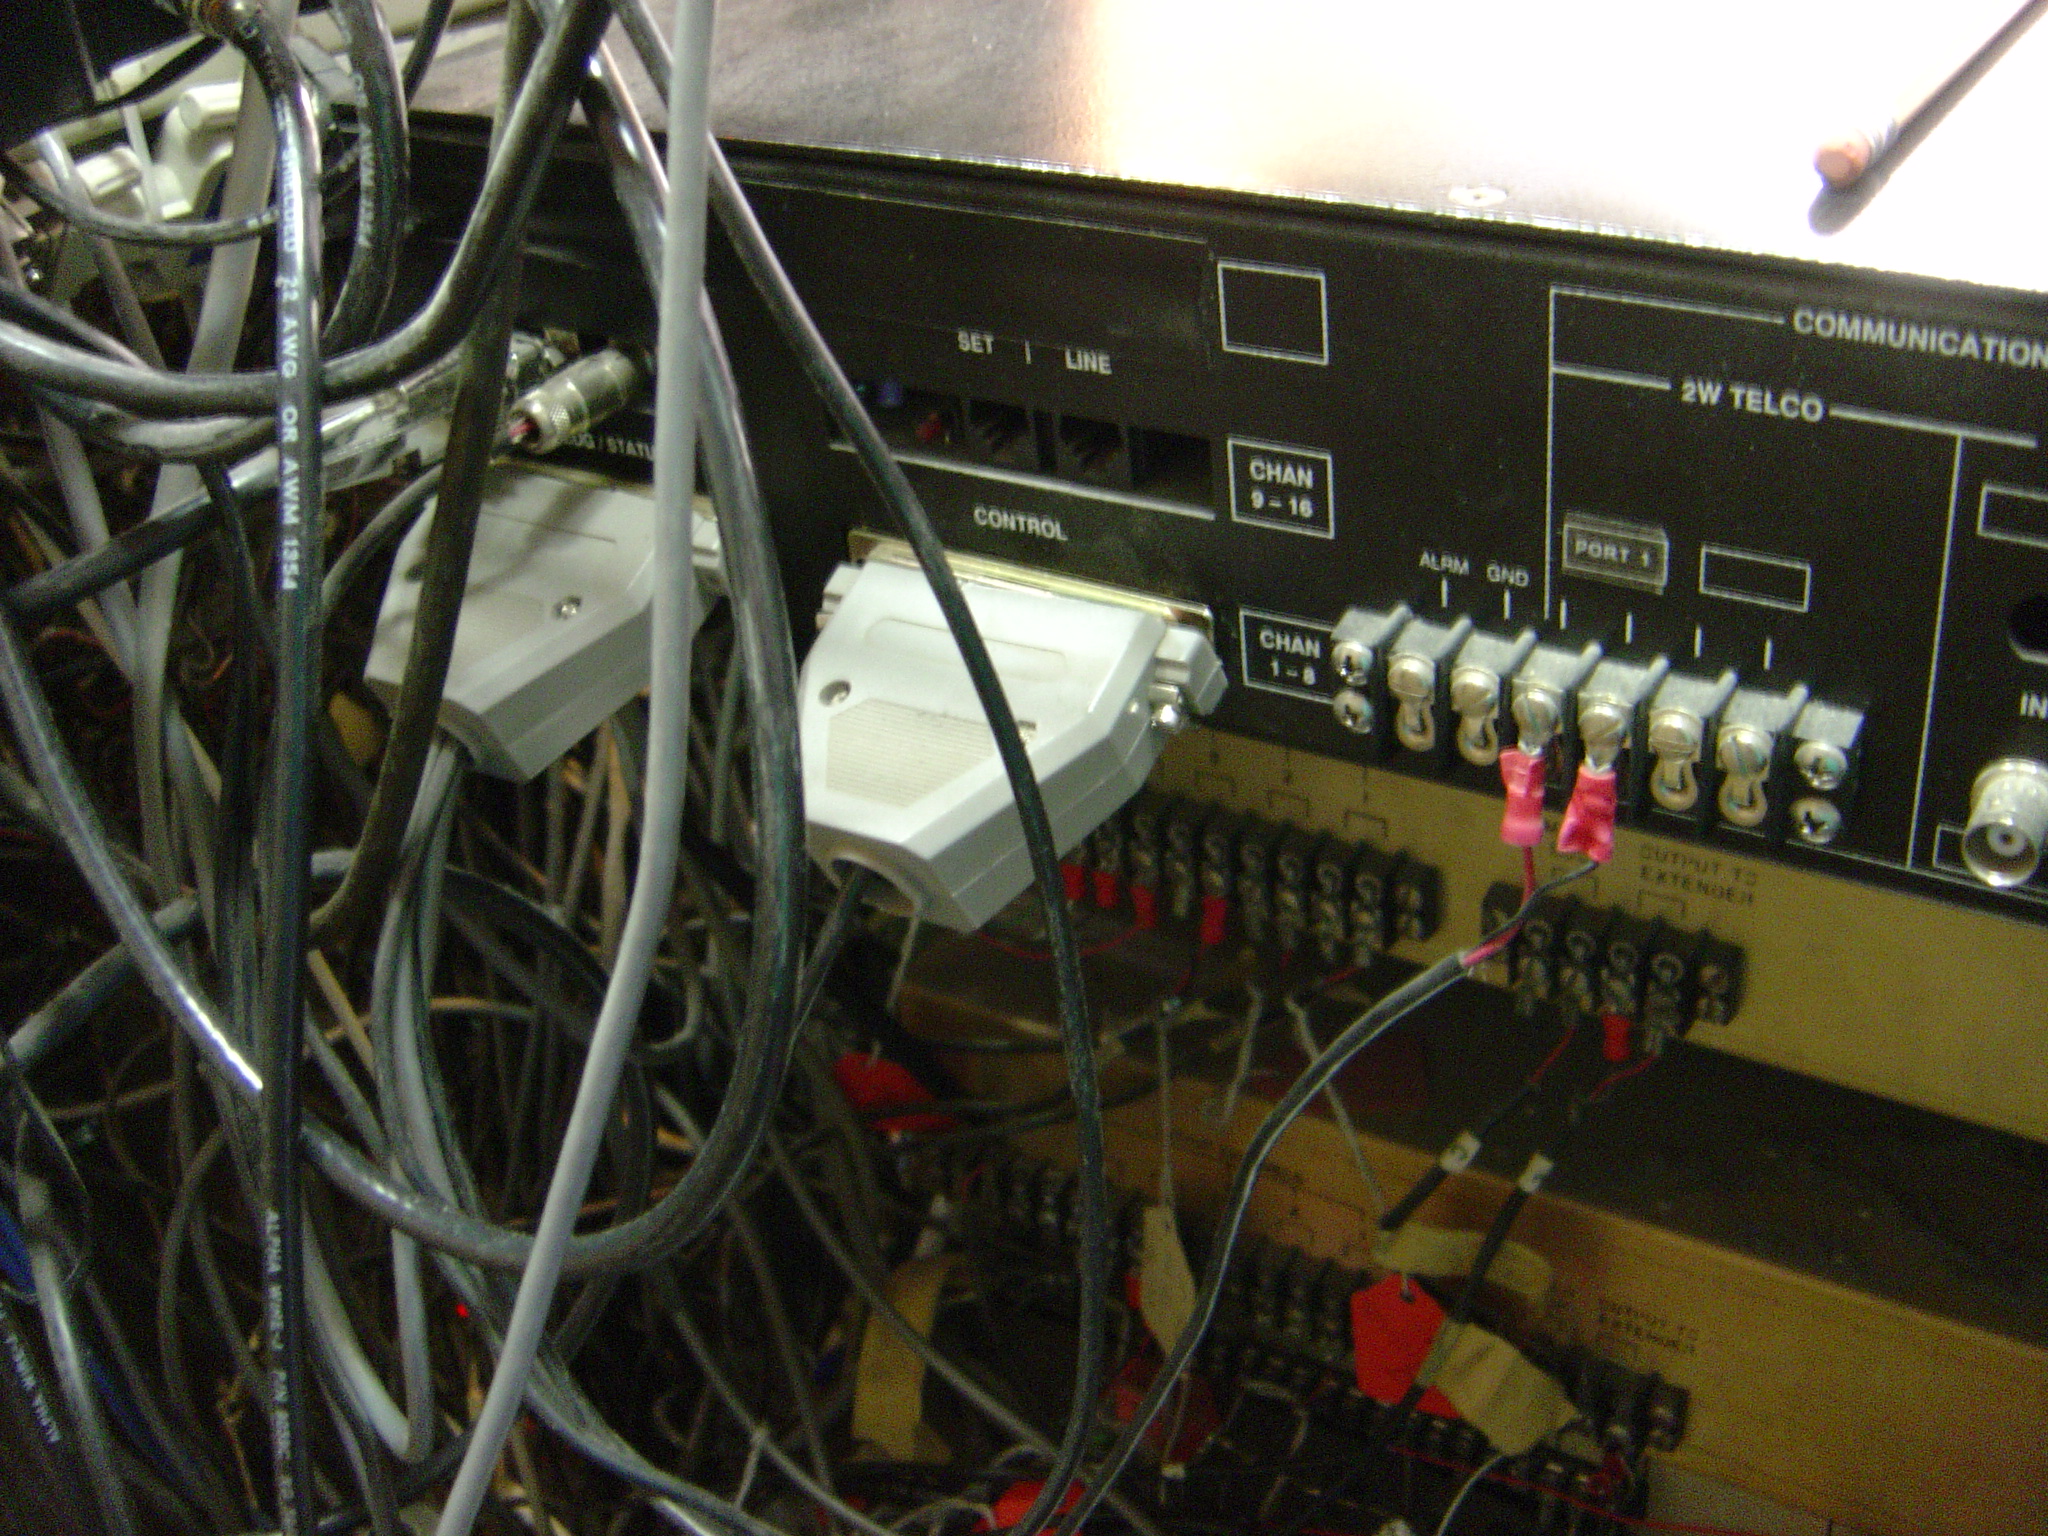 2005 - Behind the FM Rack - The remote Control.